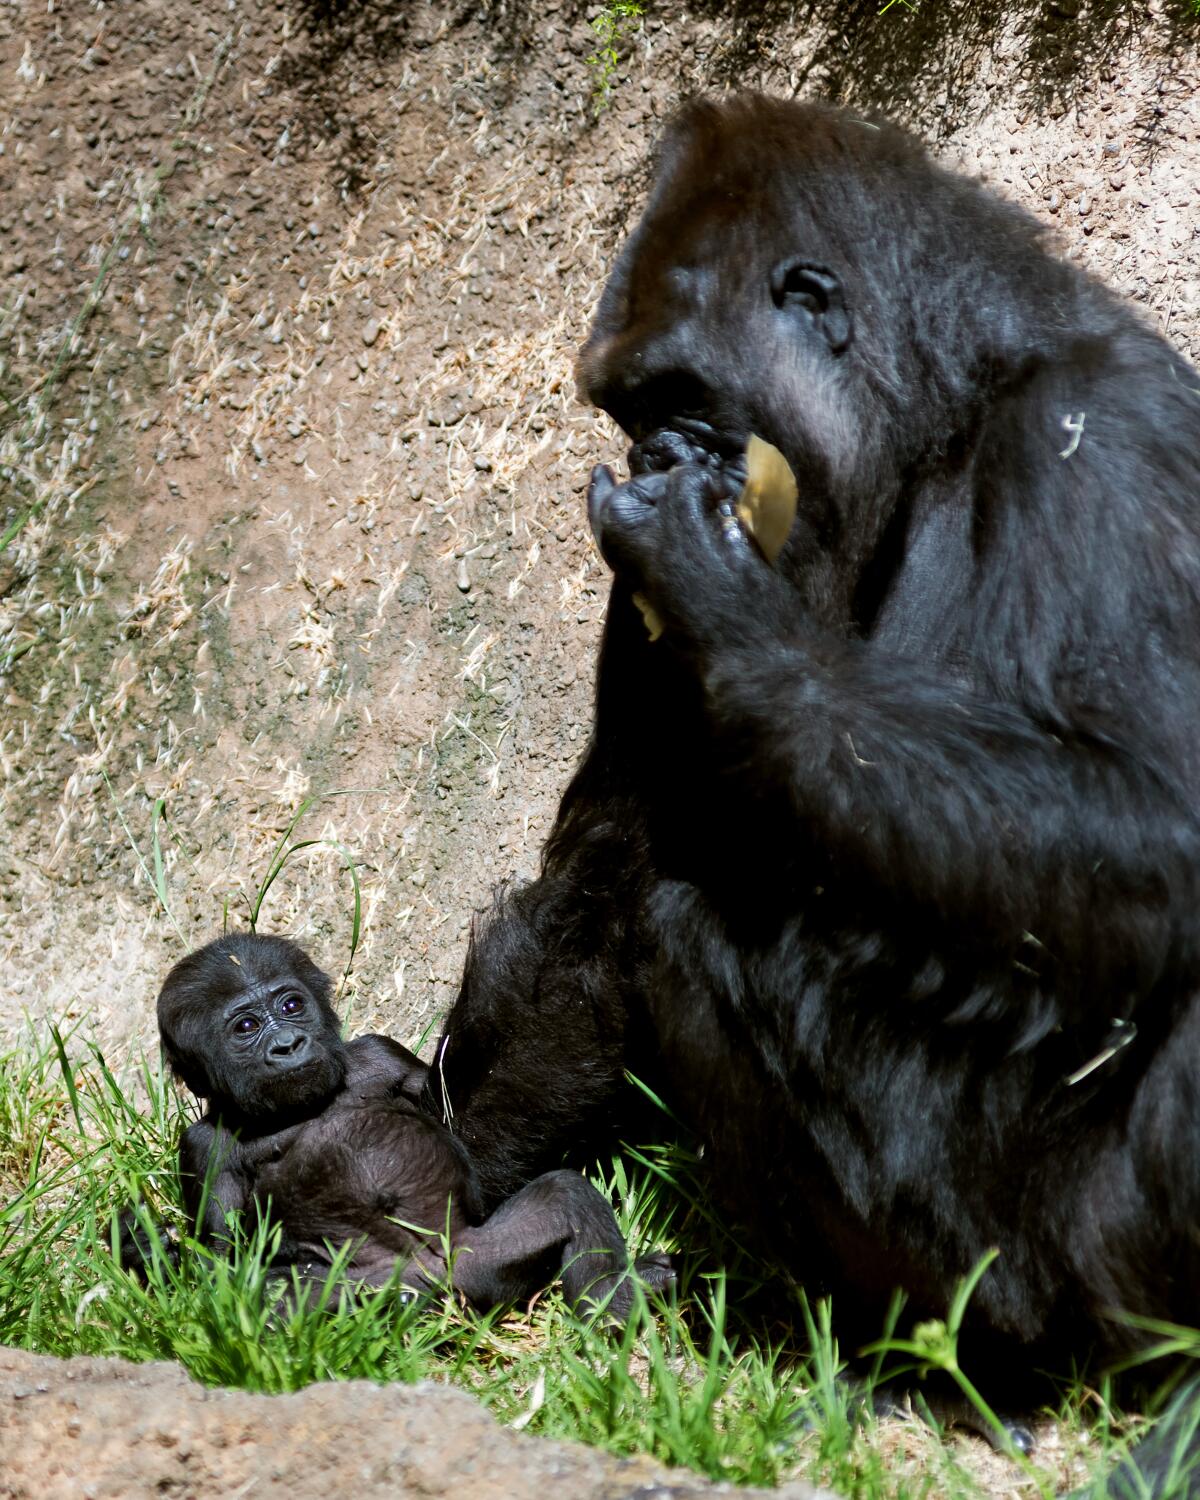 Female western lowland gorilla baby Angela with her mother, N'djia, at the Los Angeles Zoo.